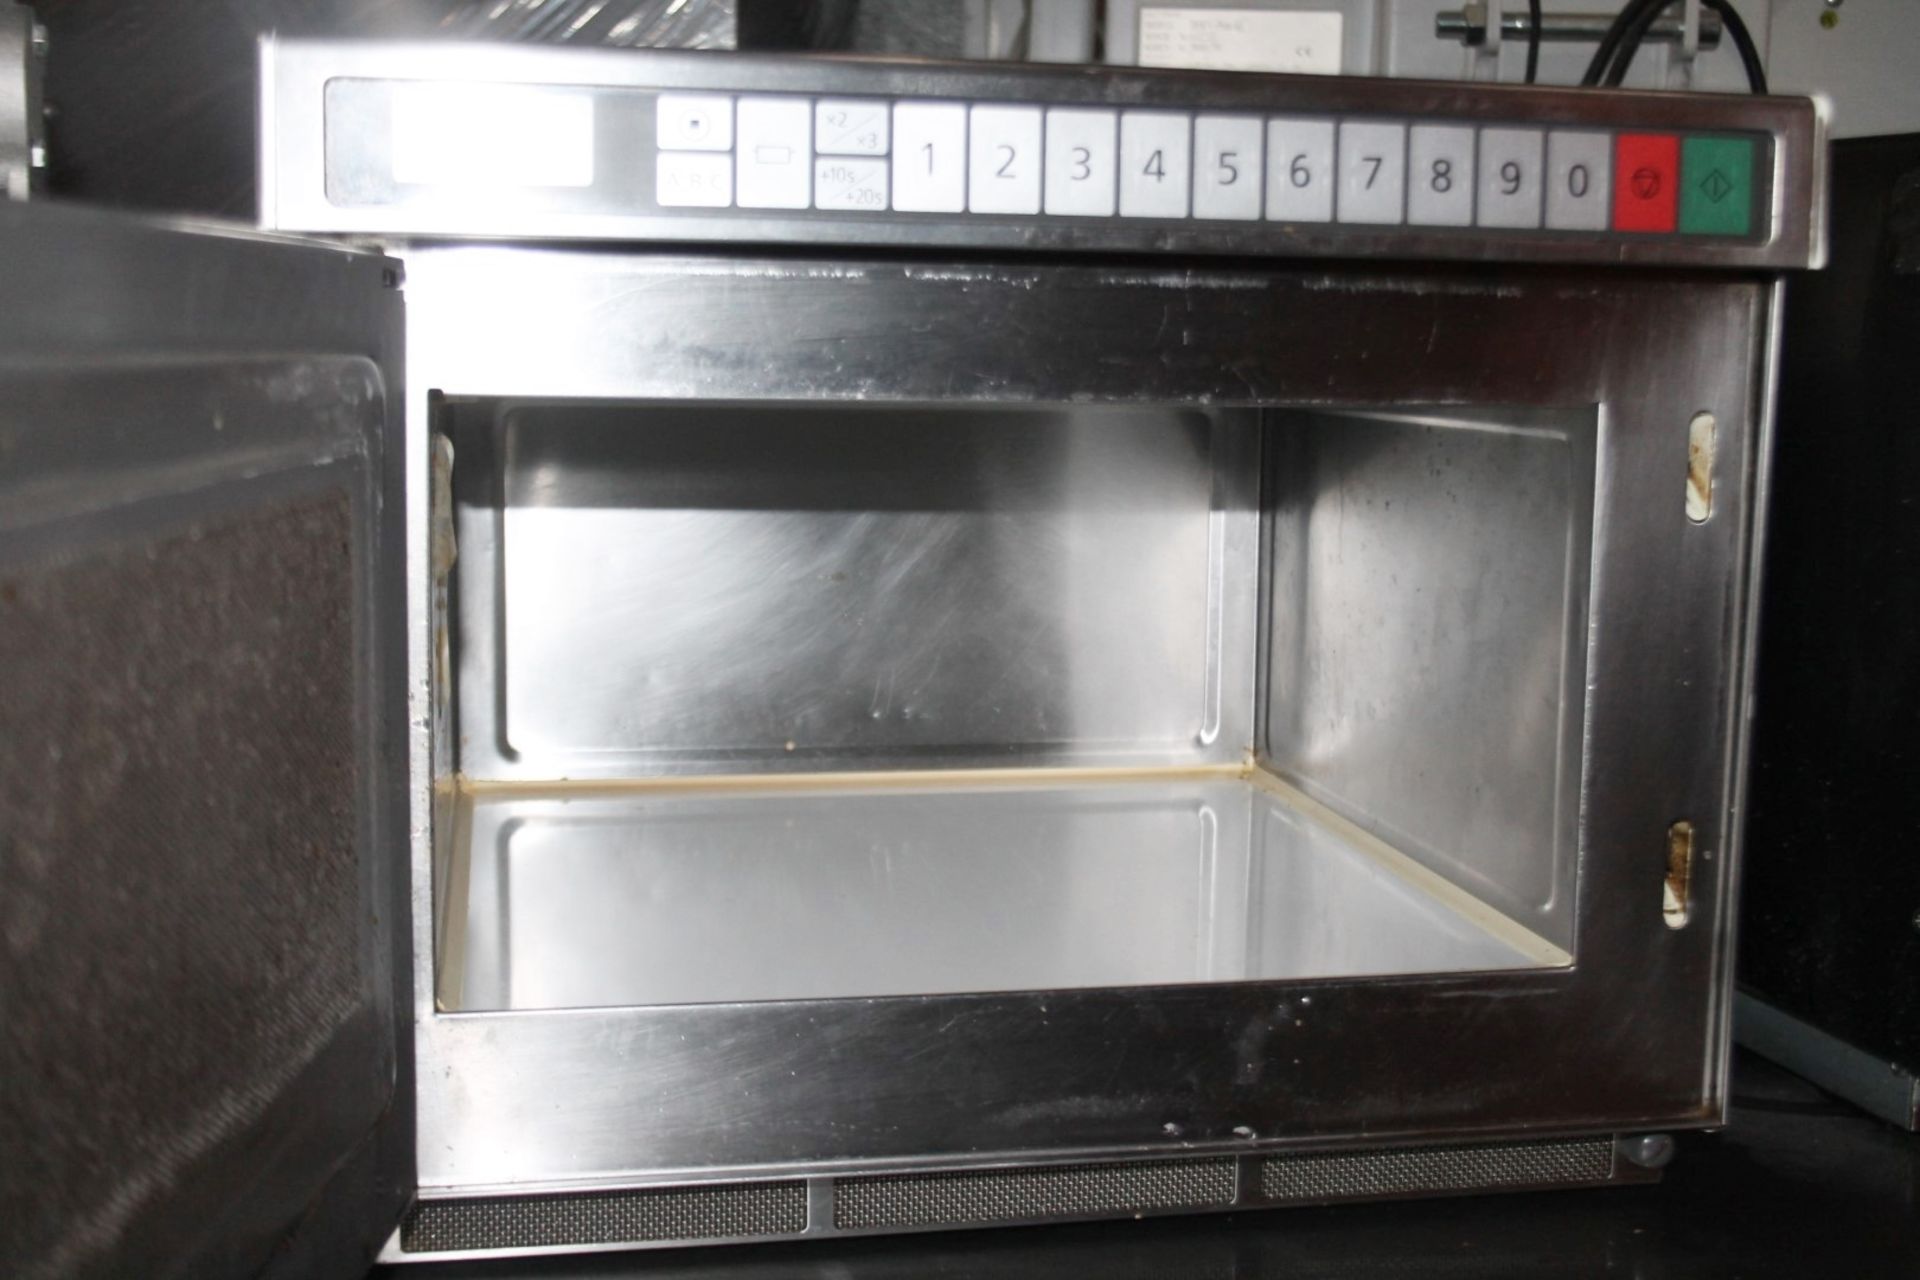 1 x Panasonic Commercial Microwave Oven Featuring A Stainless Steel Exterior And 'Microsave' - Image 4 of 7